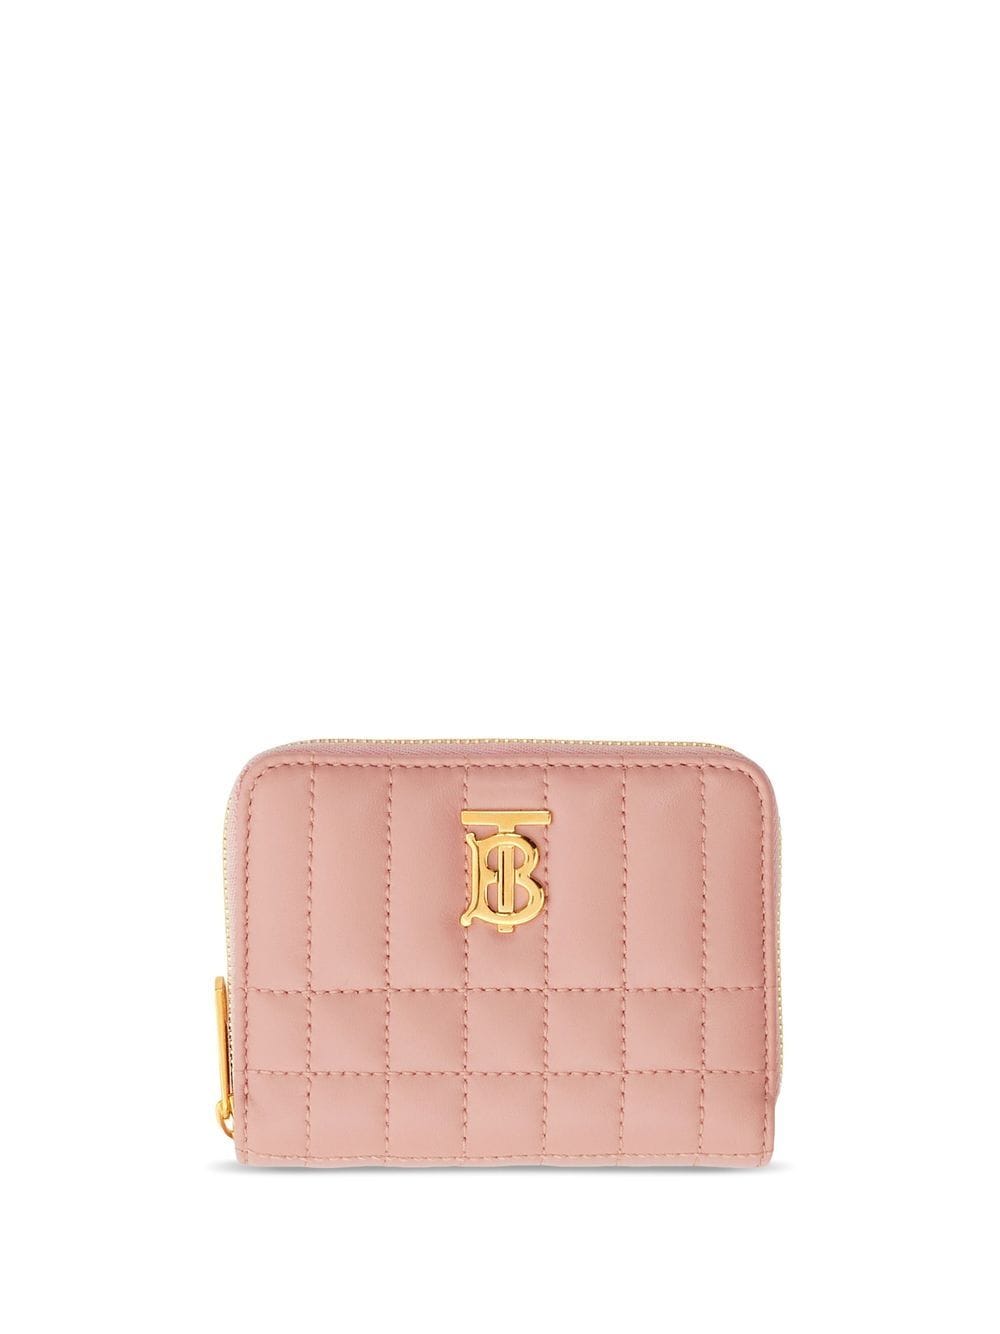 BURBERRY QUILTED-LEATHER LOLA ZIP WALLET